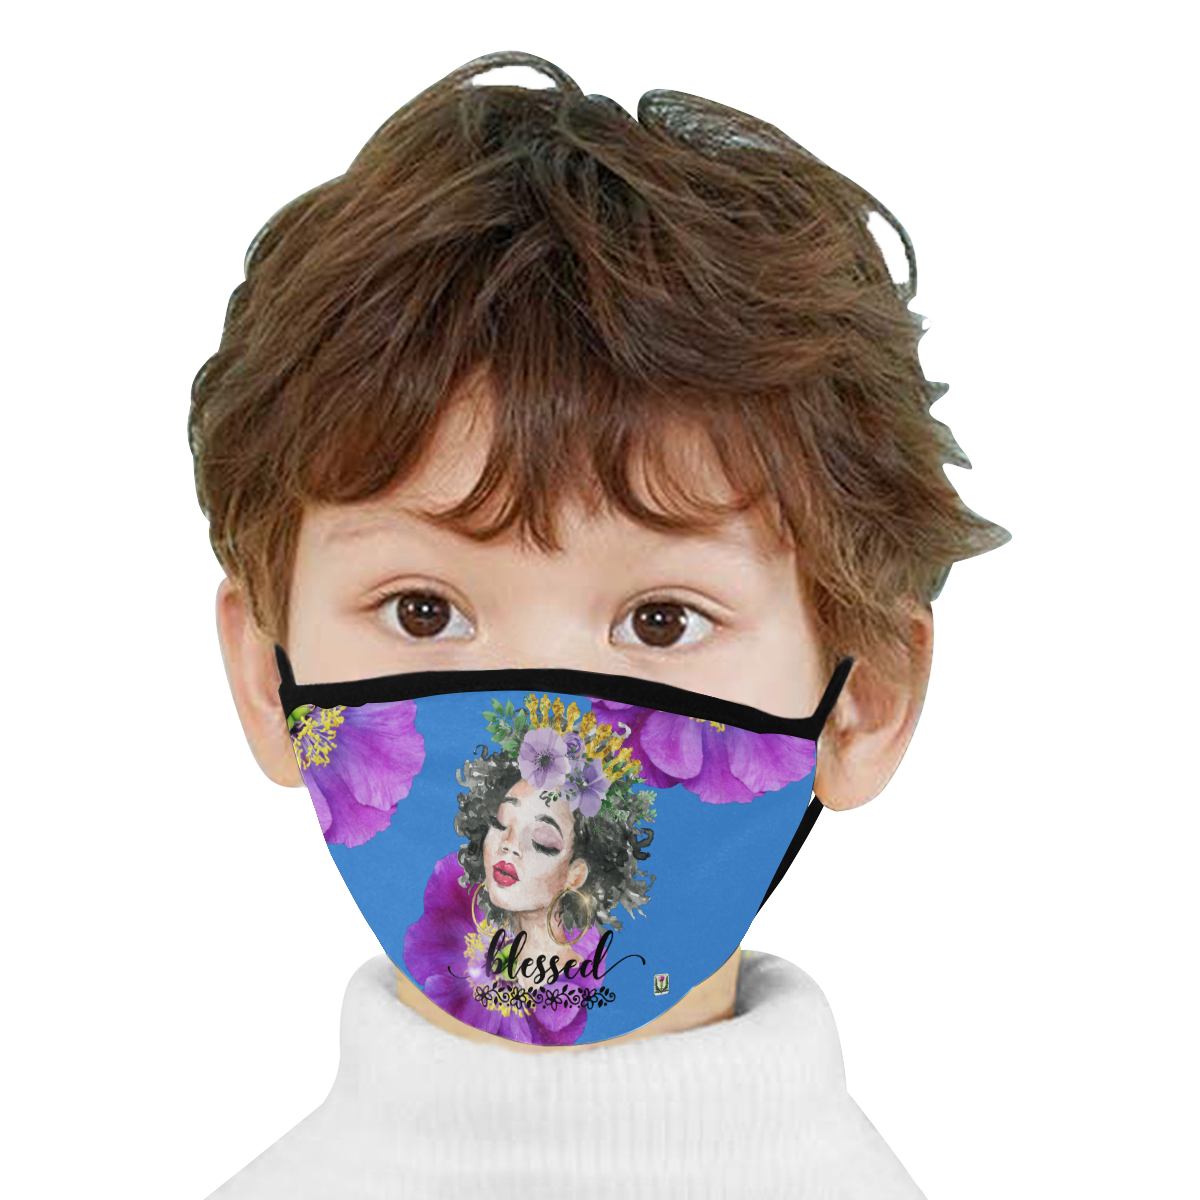 Fairlings Delight's The Word Collection- Blessed 53086a11 Mouth Mask